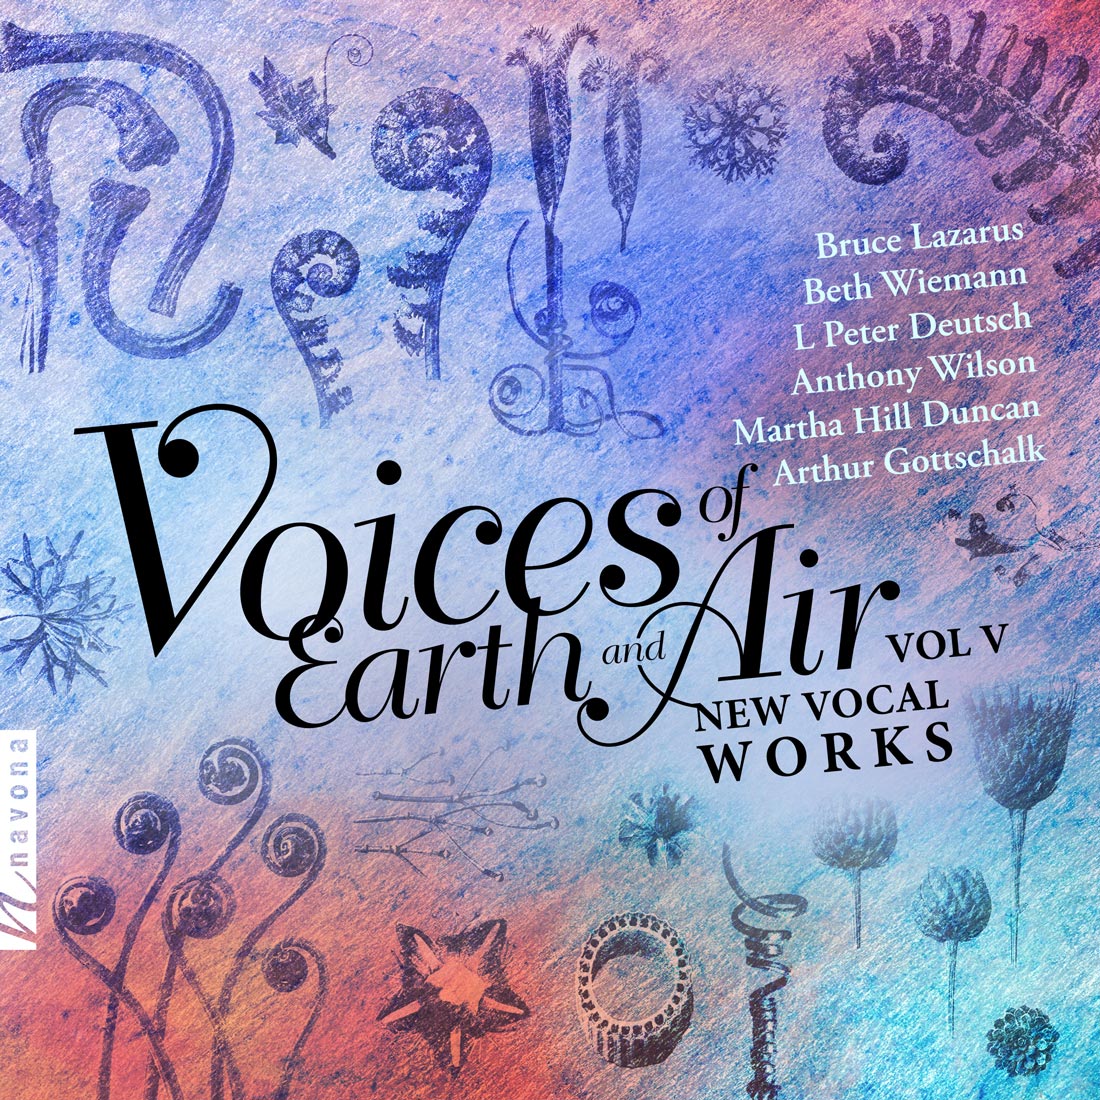 Voices of Earth & Air Vol. 5 - Album Cover